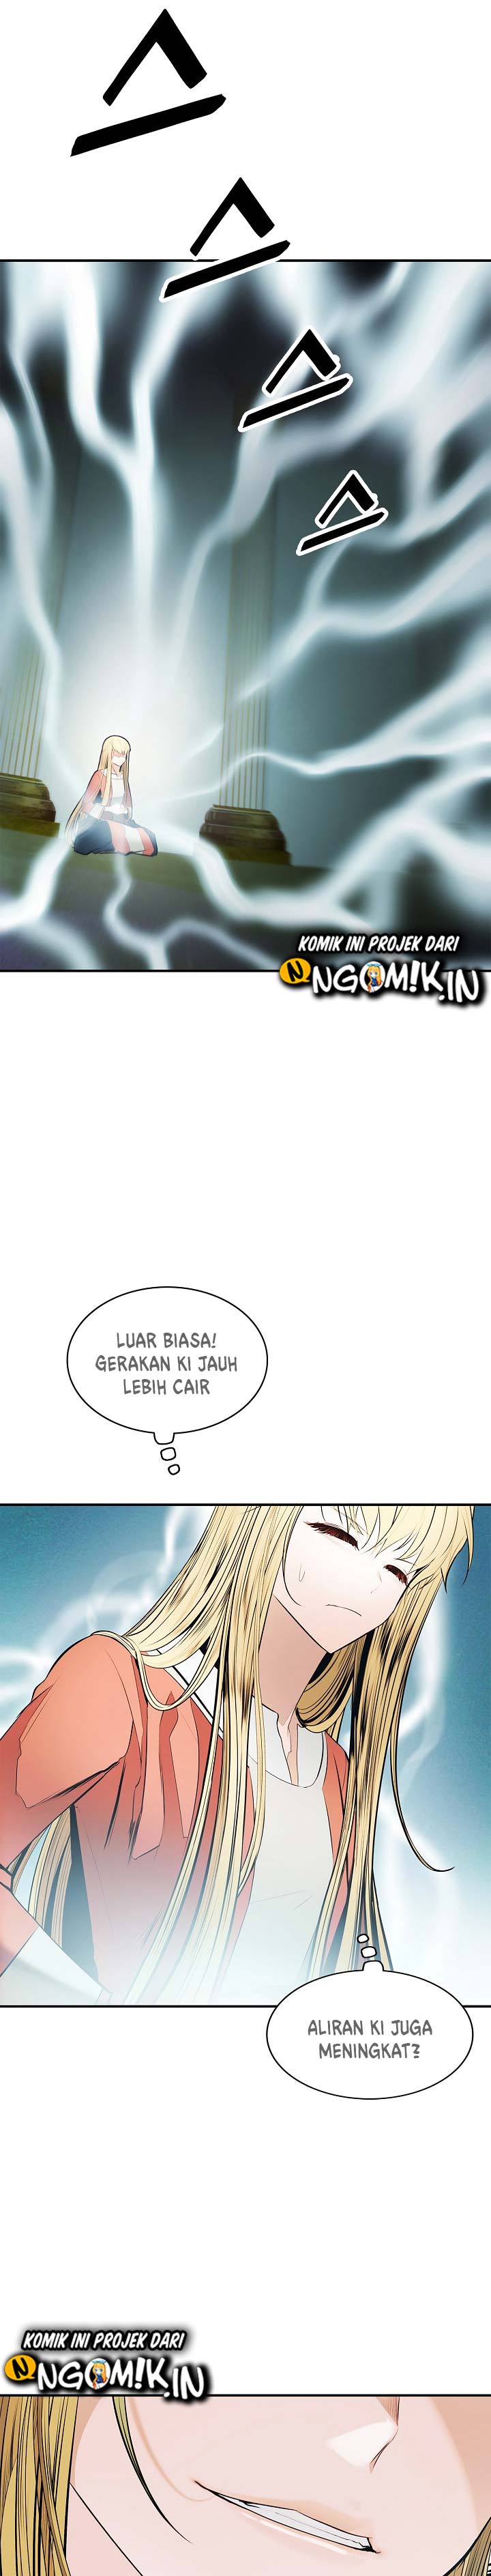 Mookhyang Dark Lady Chapter 65